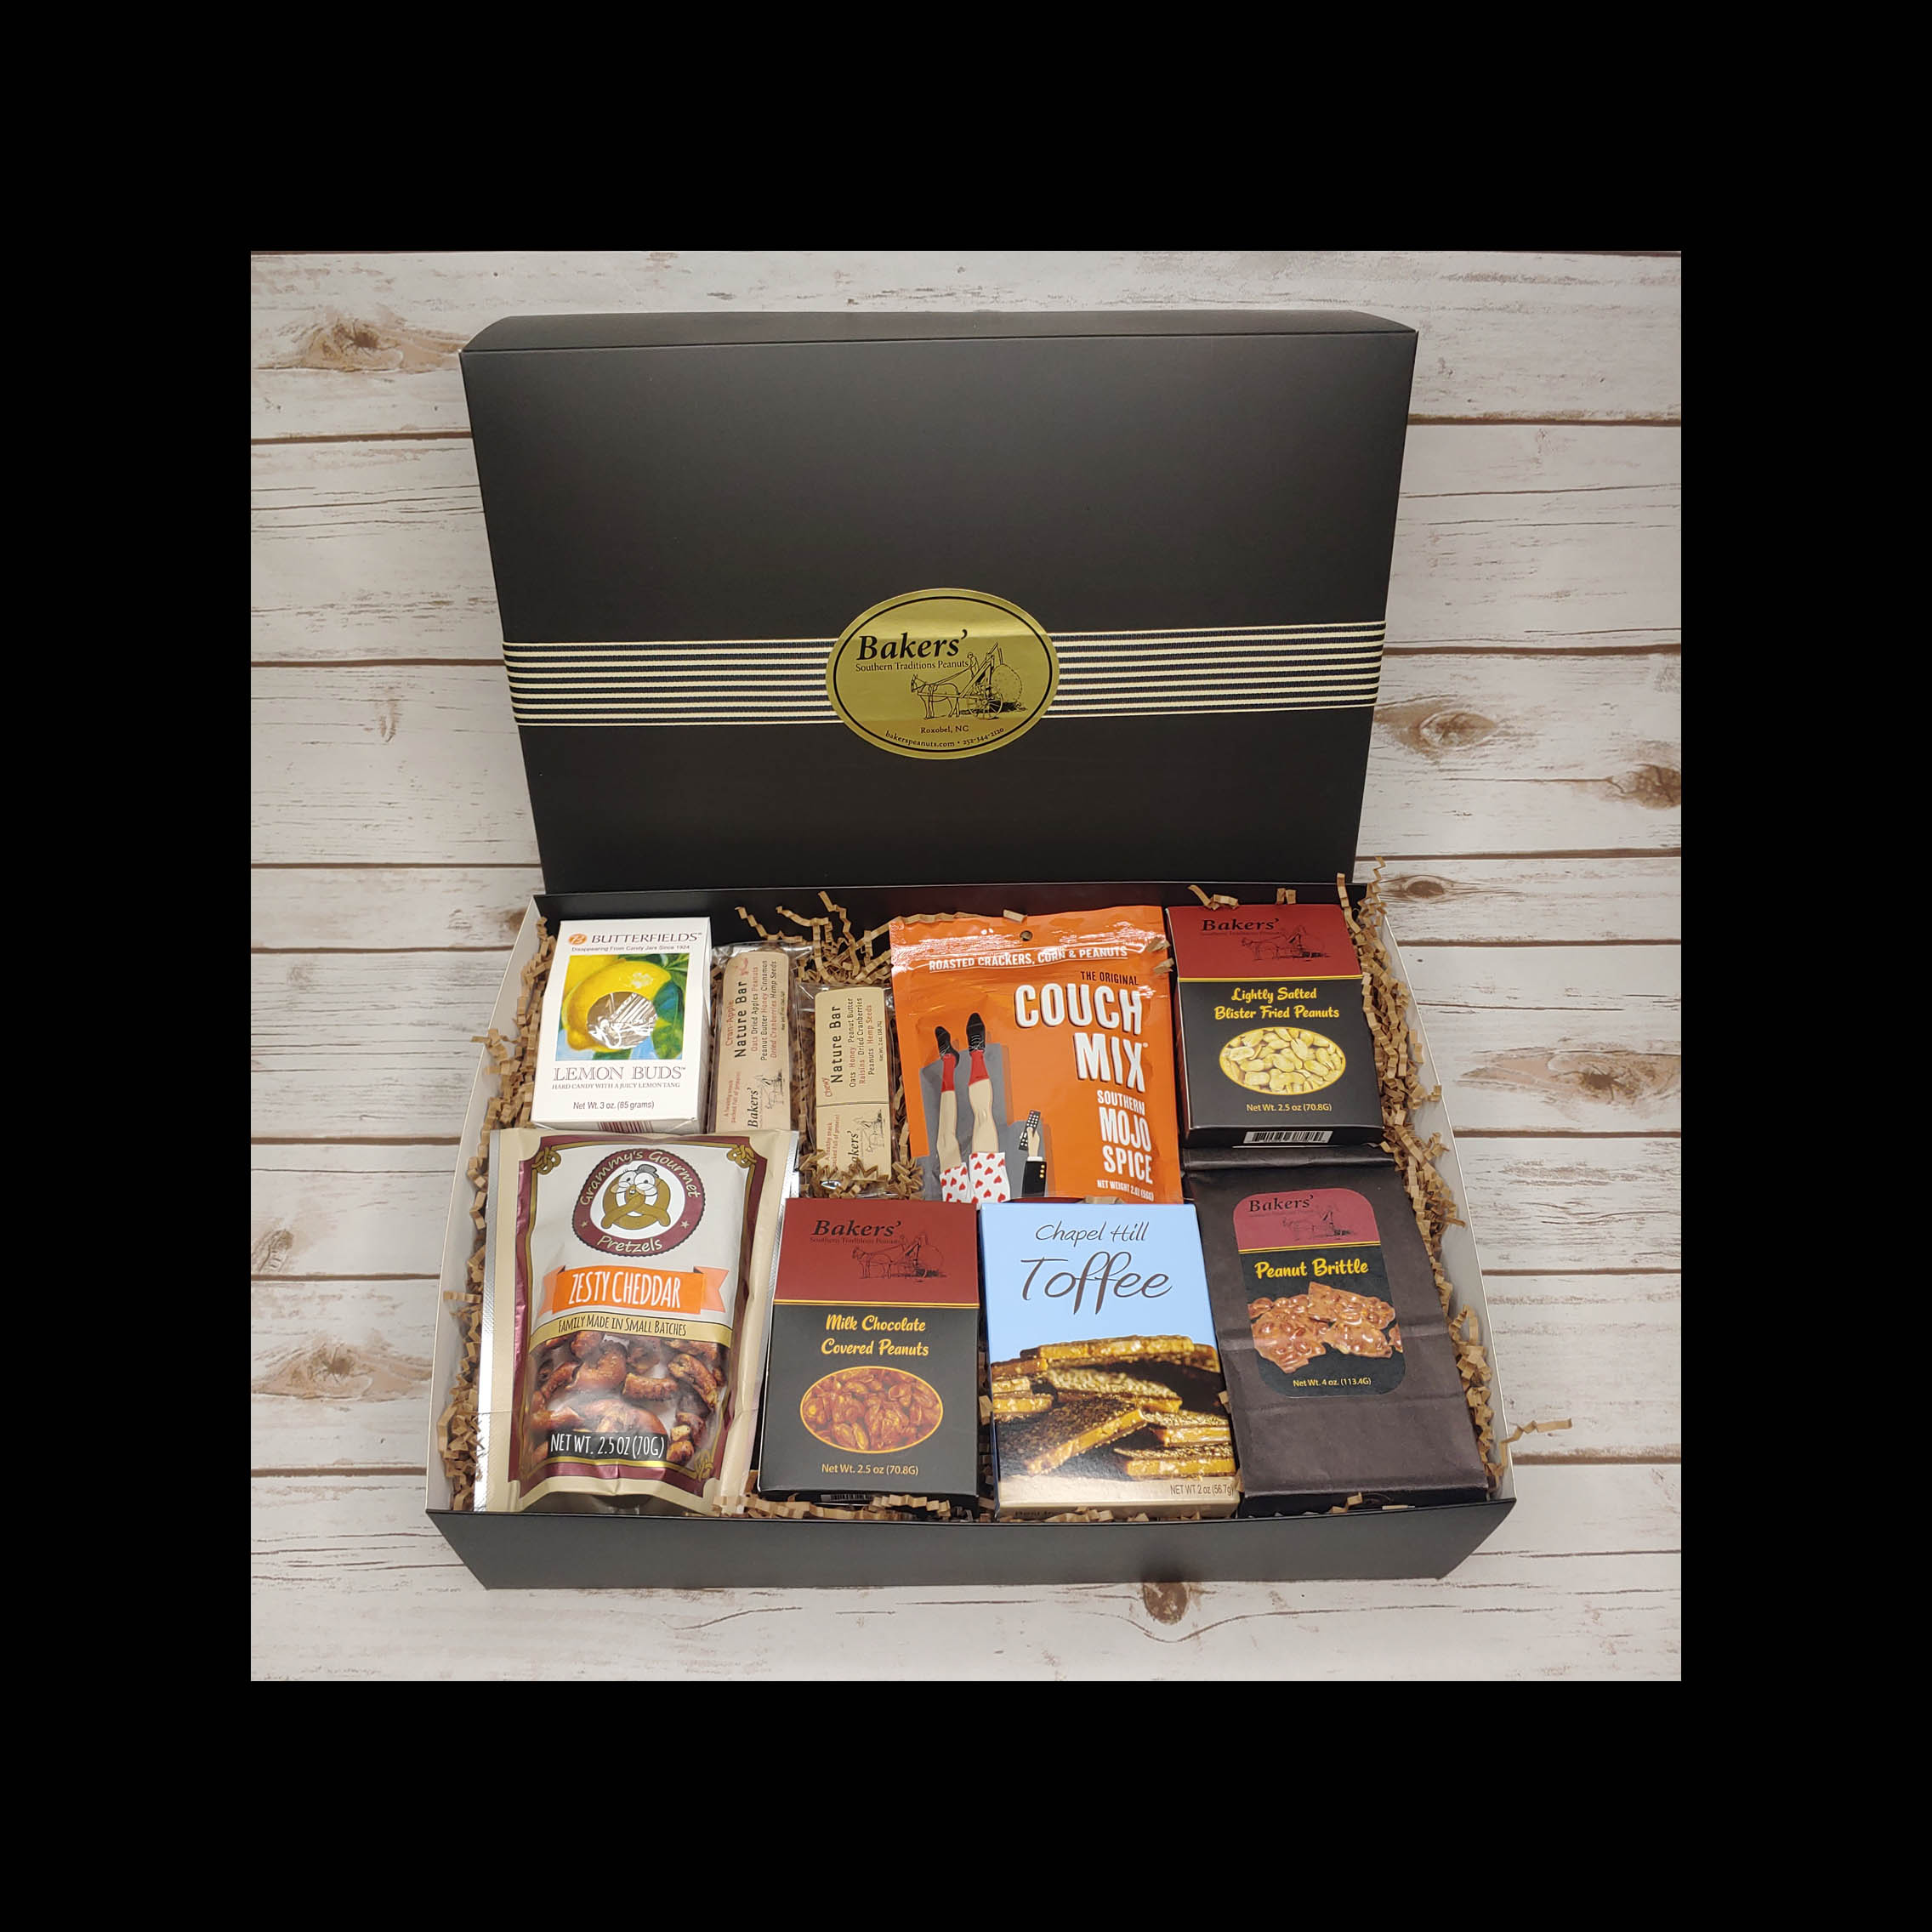 Bakers' Snack Box